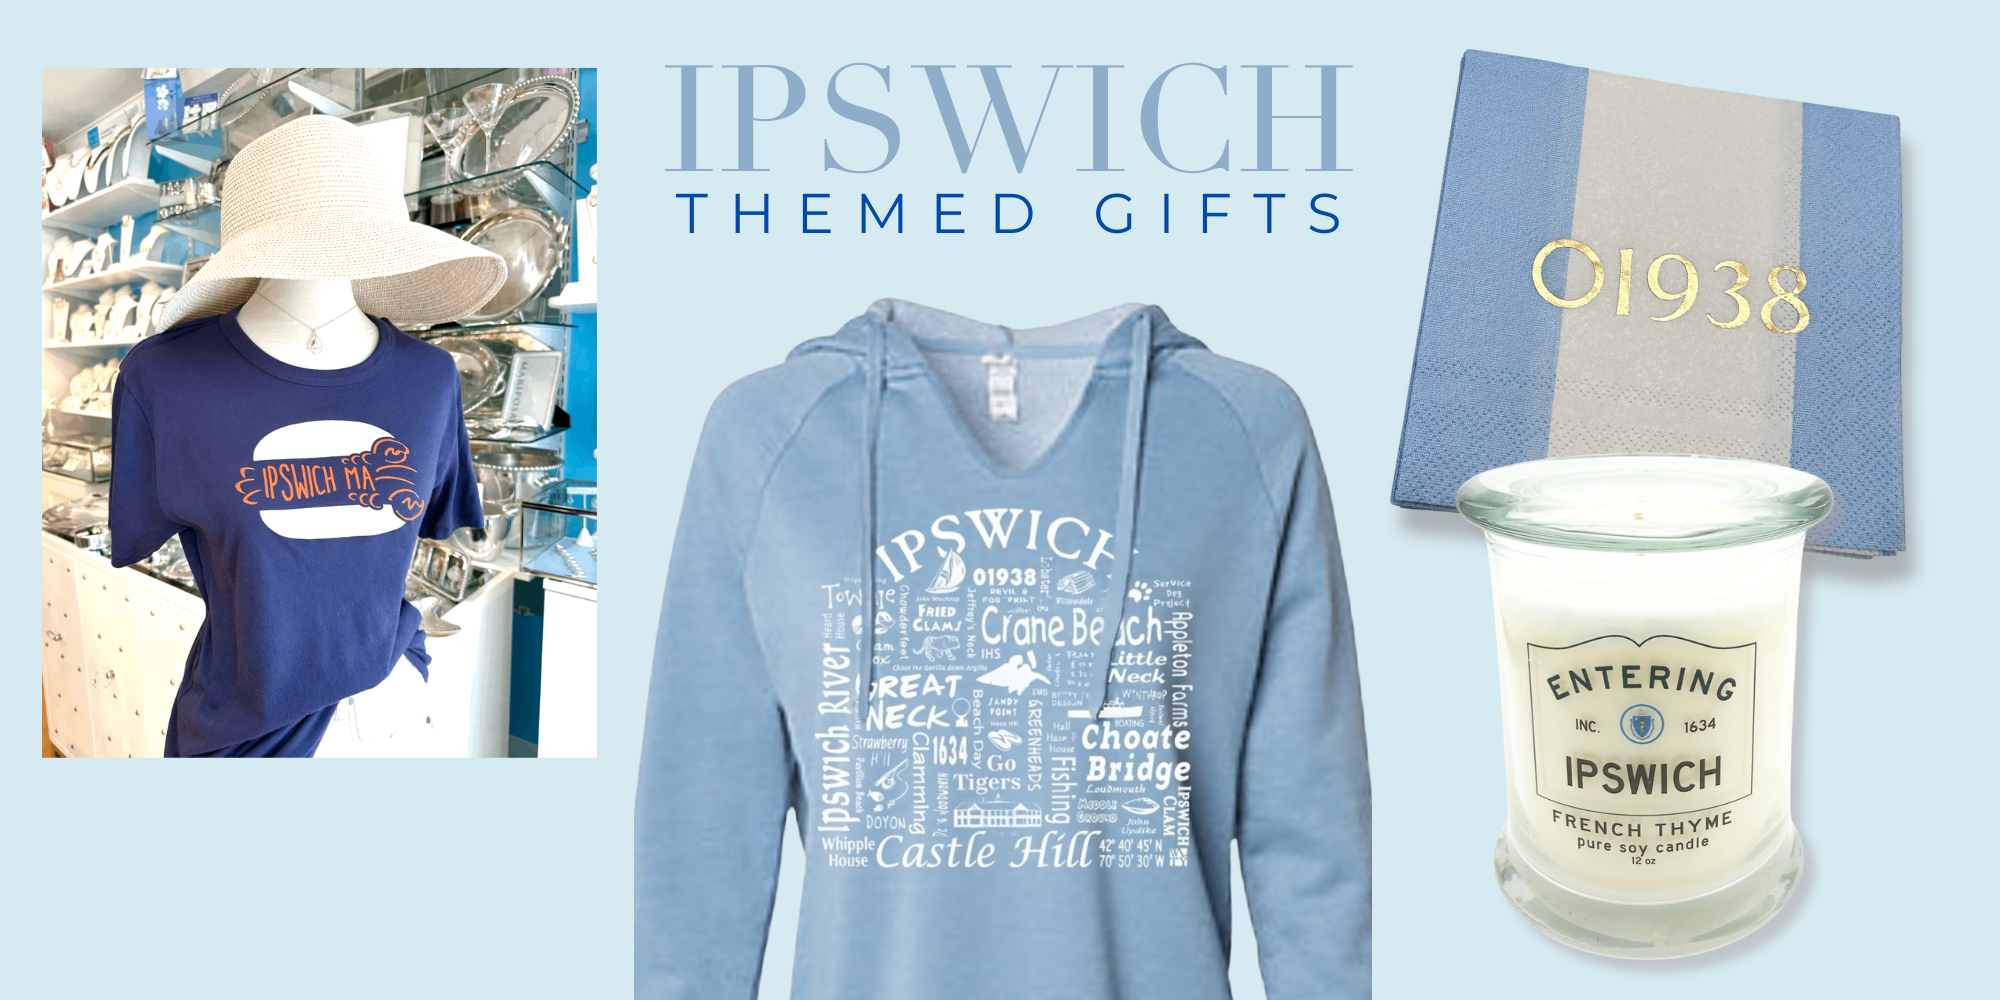 Ipswich+Themed+Gifts.png